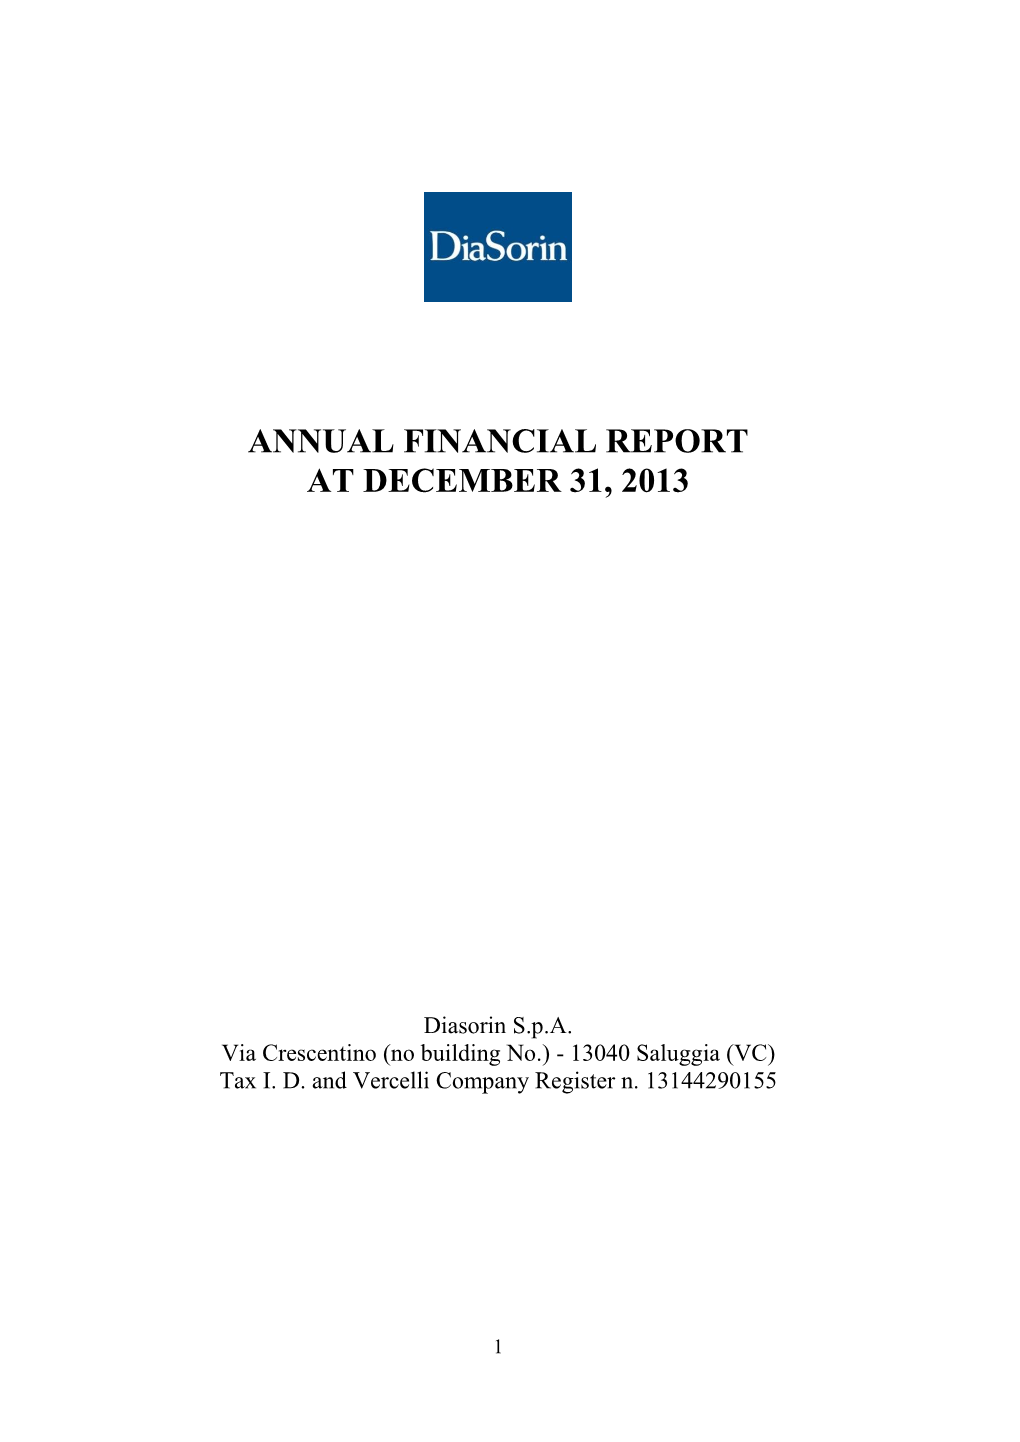 Annual Financial Report at December 31, 2013